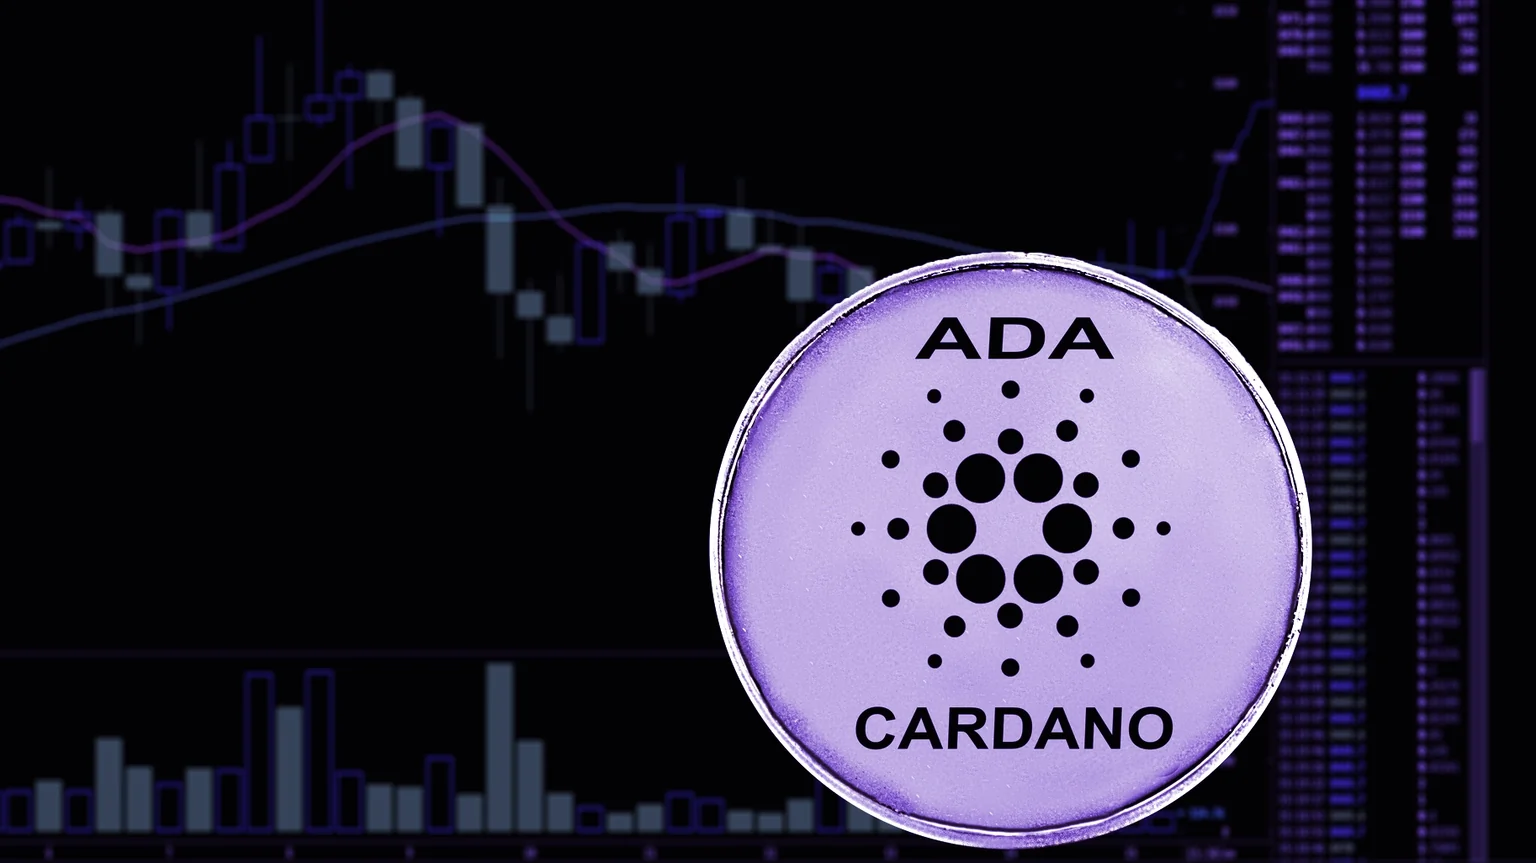 Cardano is a major cryptocurrency. Image: Shutterstock